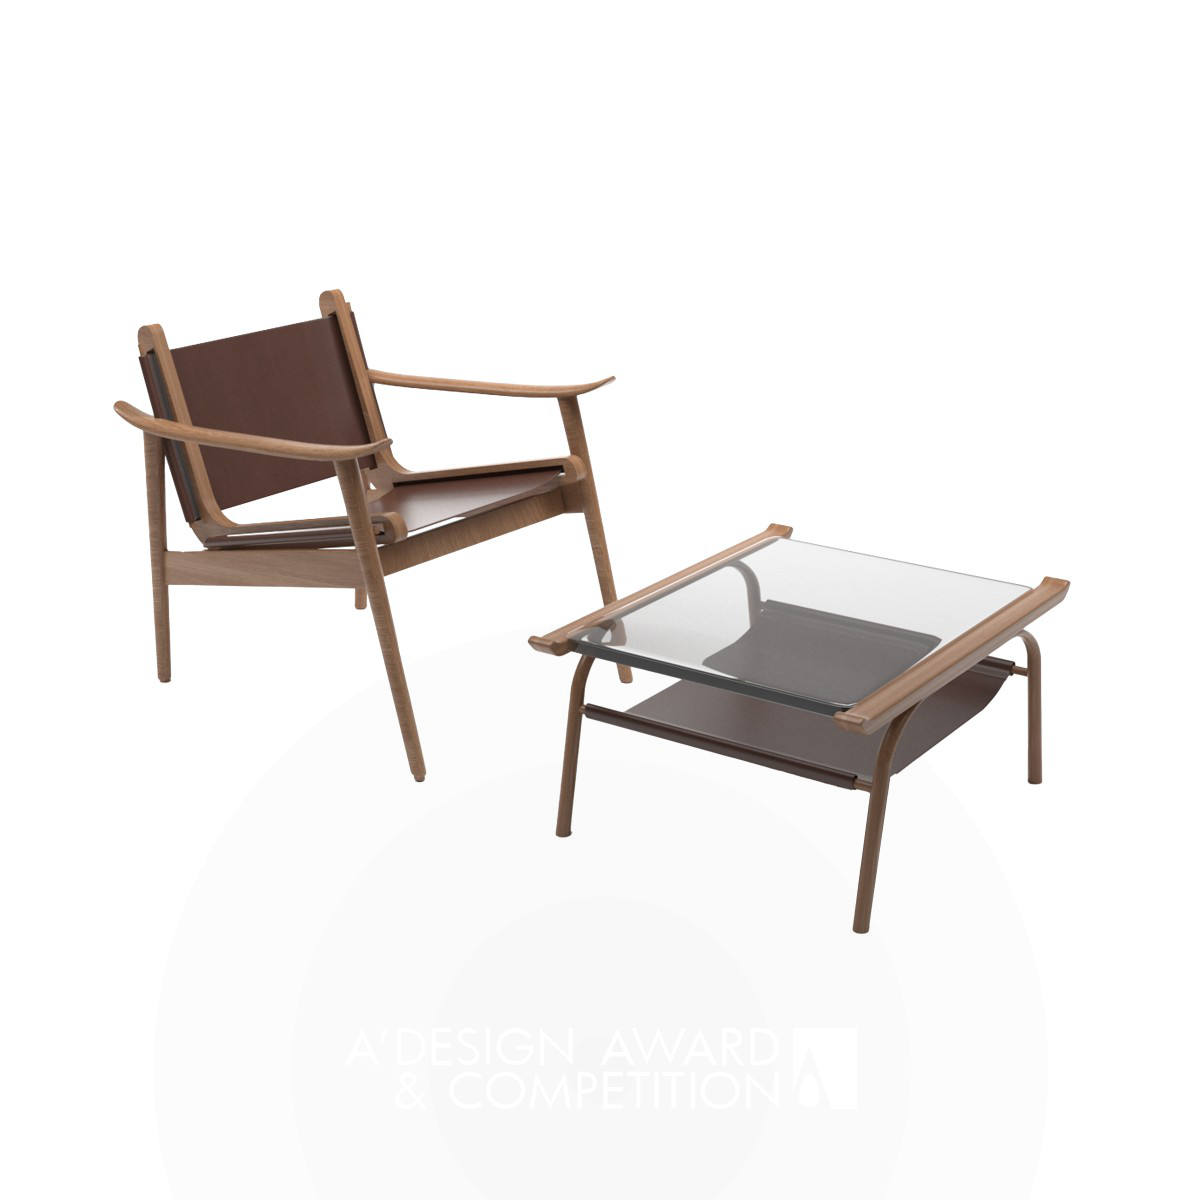 Hui Lounge Table and Chair by Dan Shao